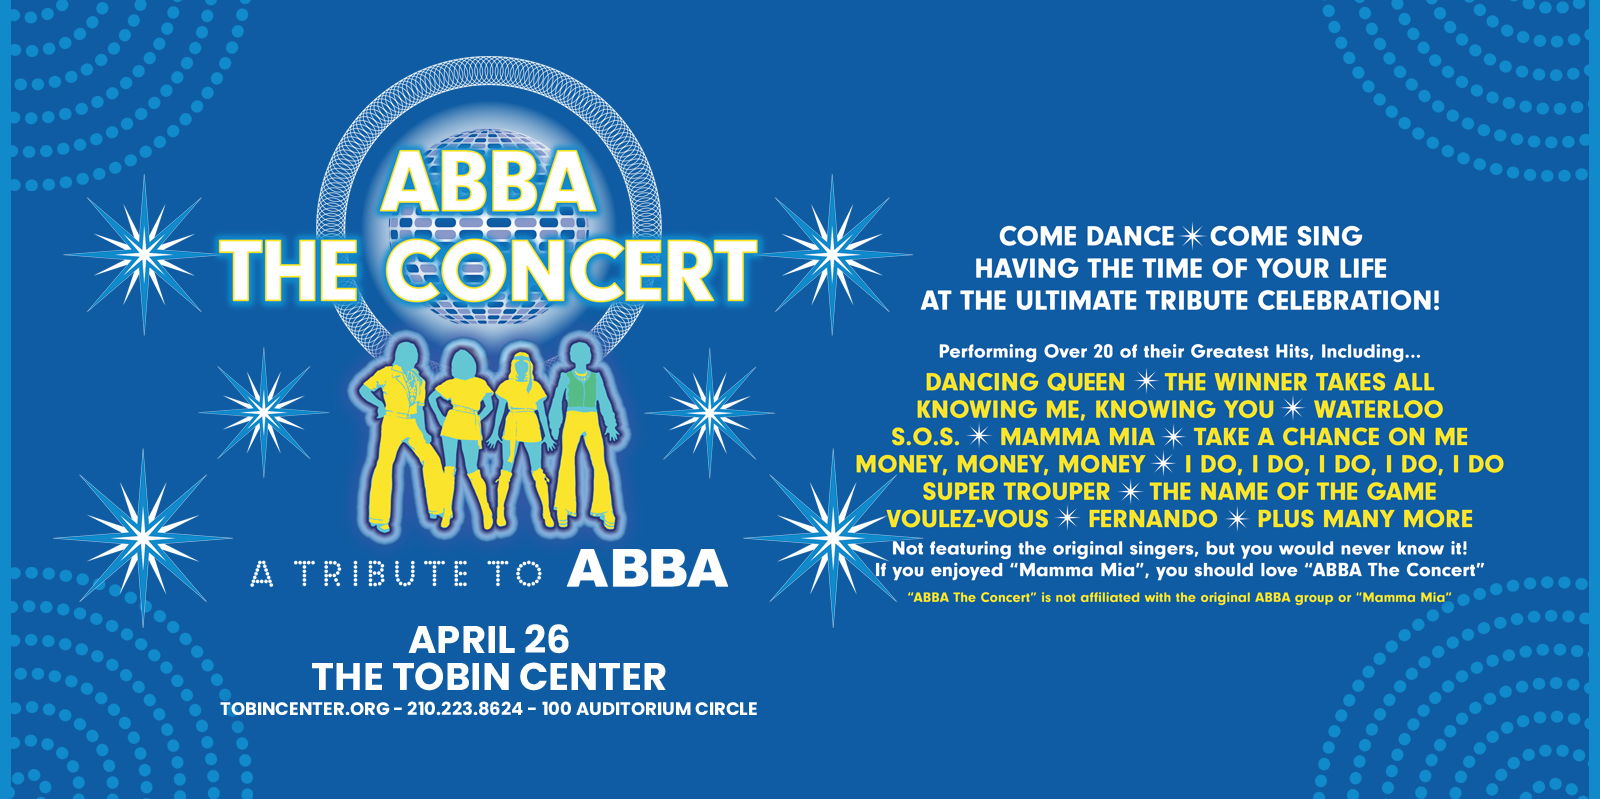 ABBA The Concert promotional image